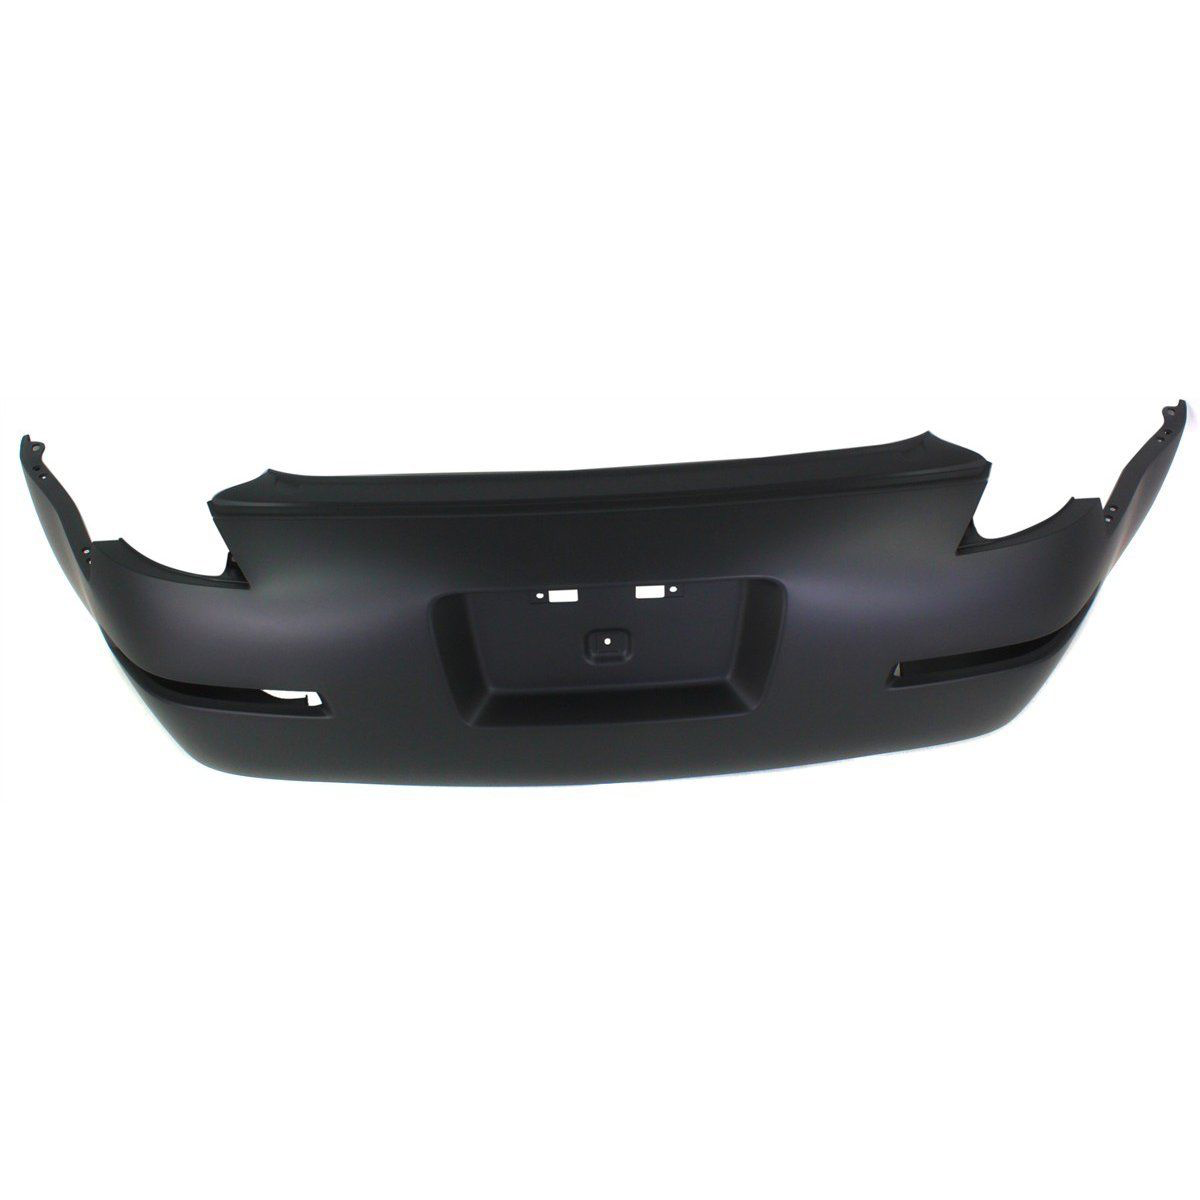 2003-2009 NISSAN 350Z Rear Bumper Cover BASE|ENTHUSIAST|TOURING|35TH ANNIVERSARY Painted to Match